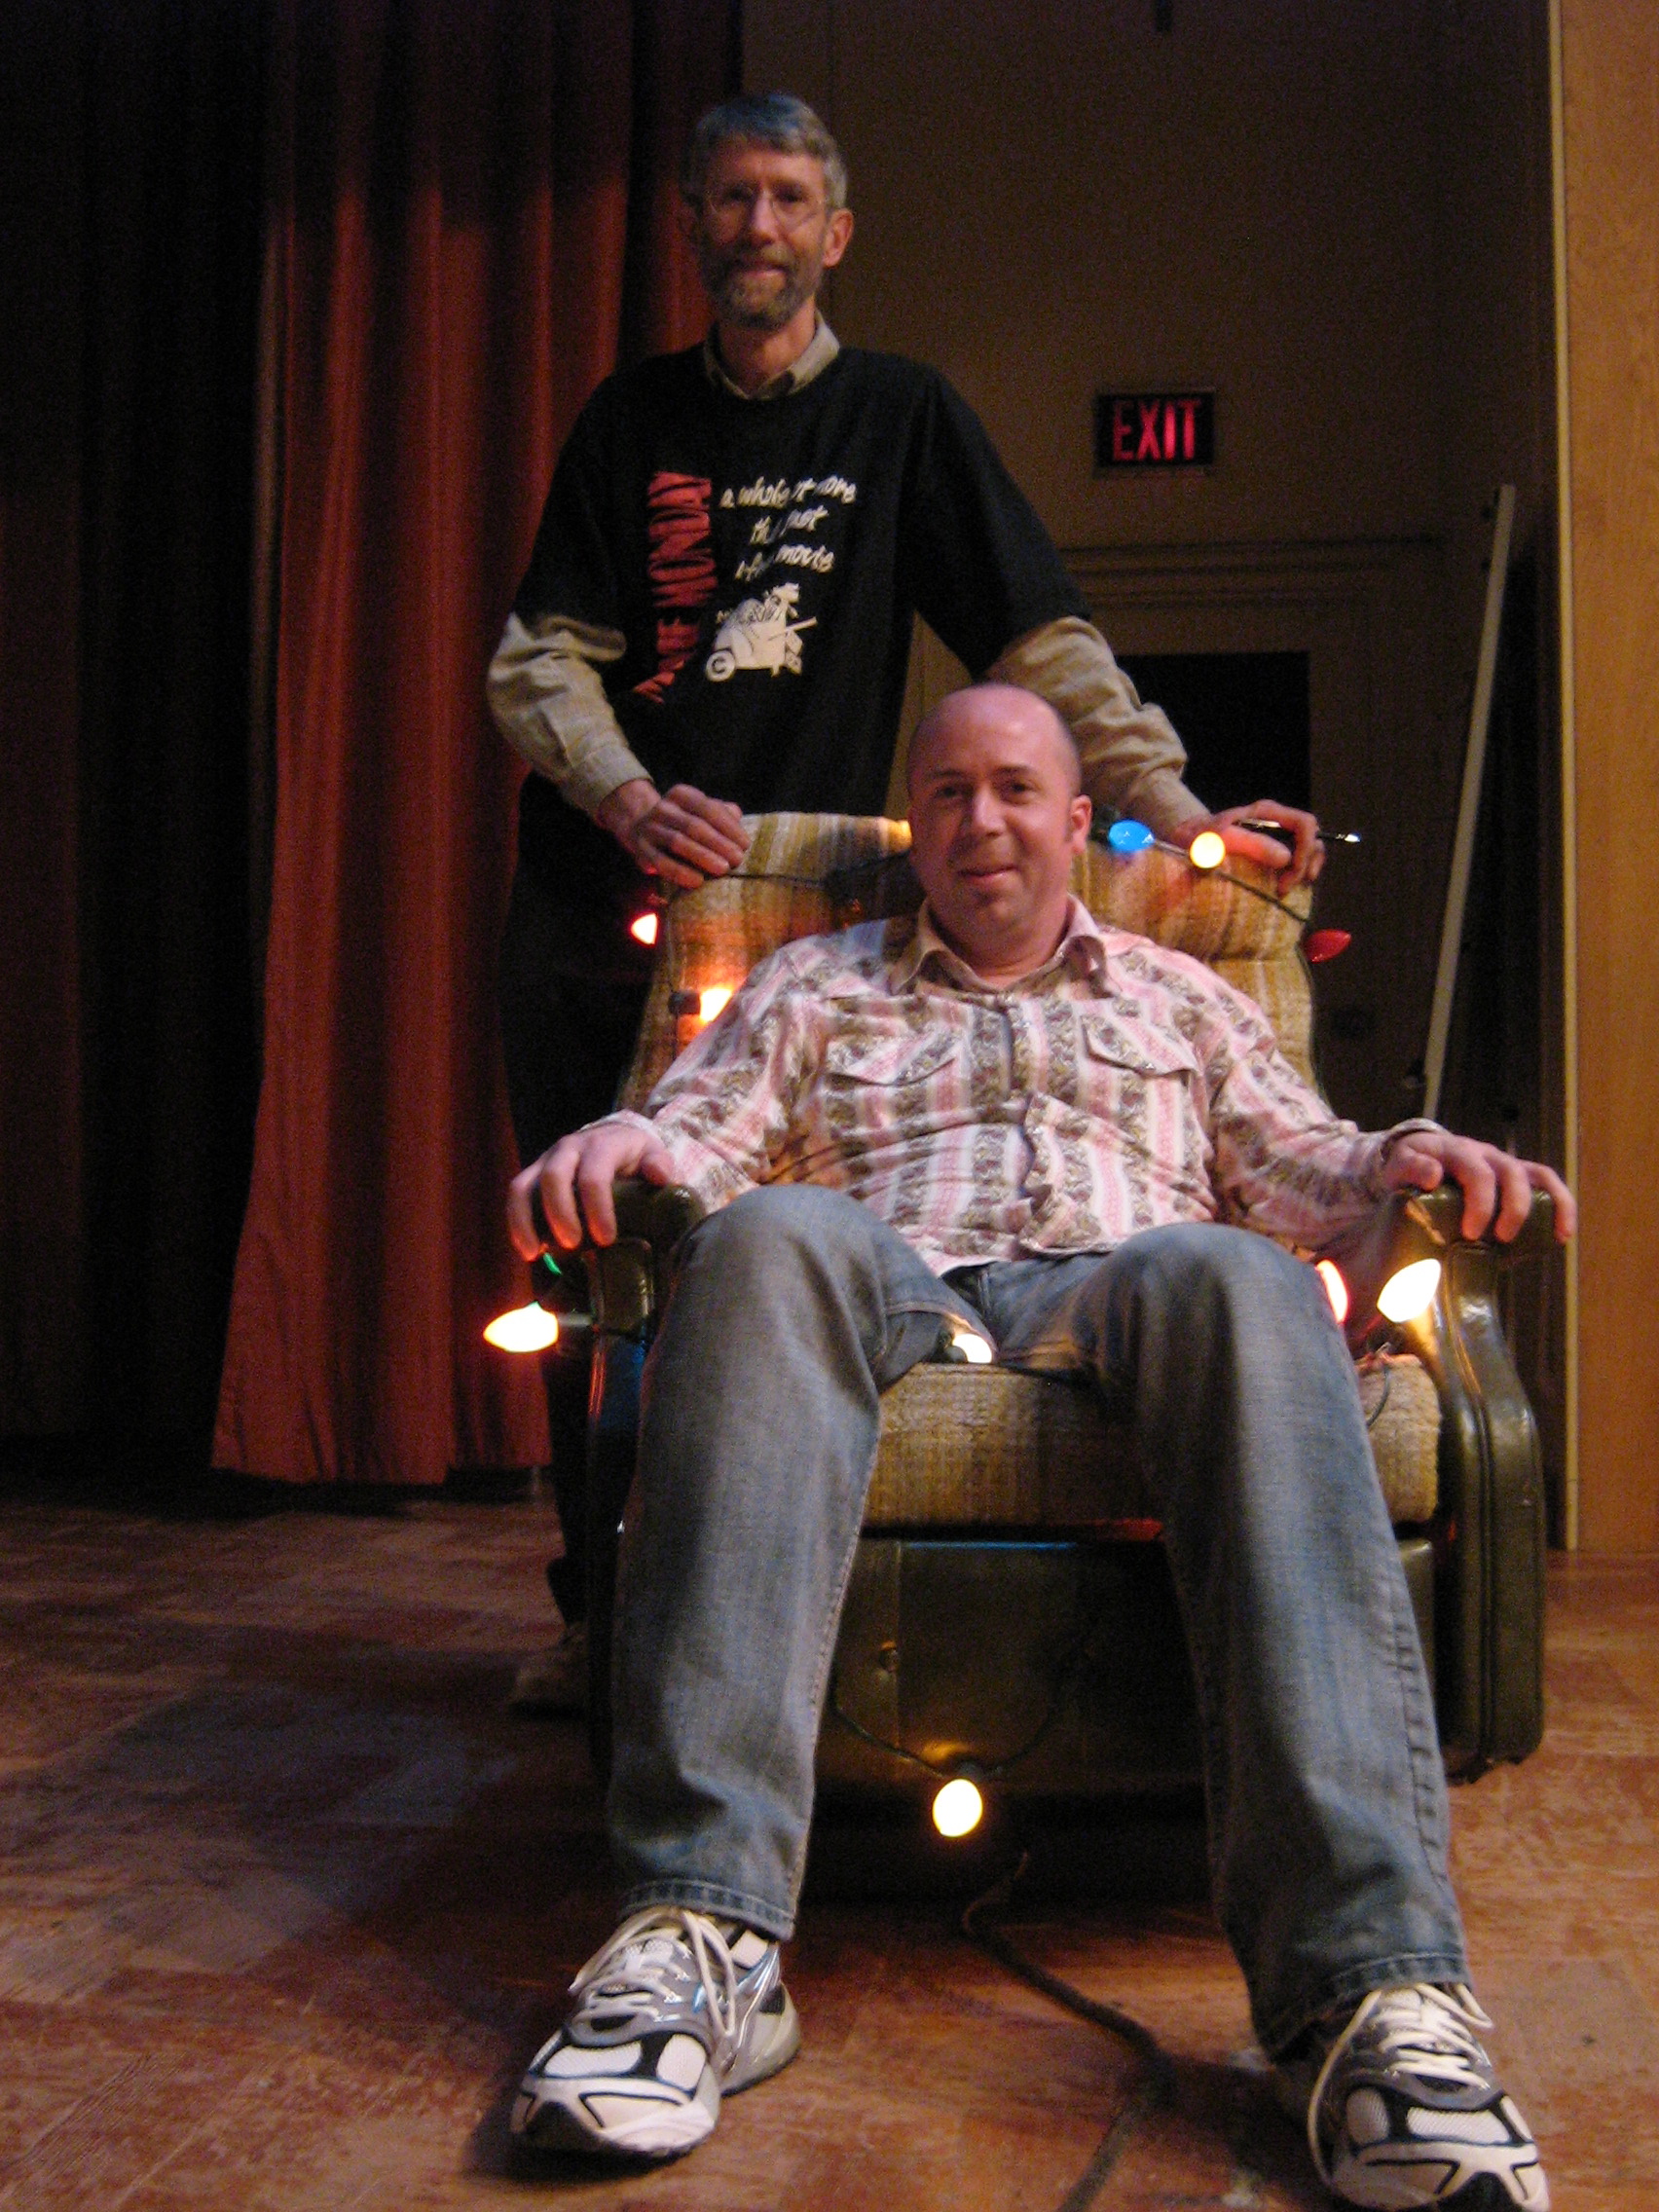 Jan 2007 After the film “Fetching Cody” Vancouver director David Ray sits in my dads old easy chair - the exact copy of the time travel chair in the film, Christmas lights and all.